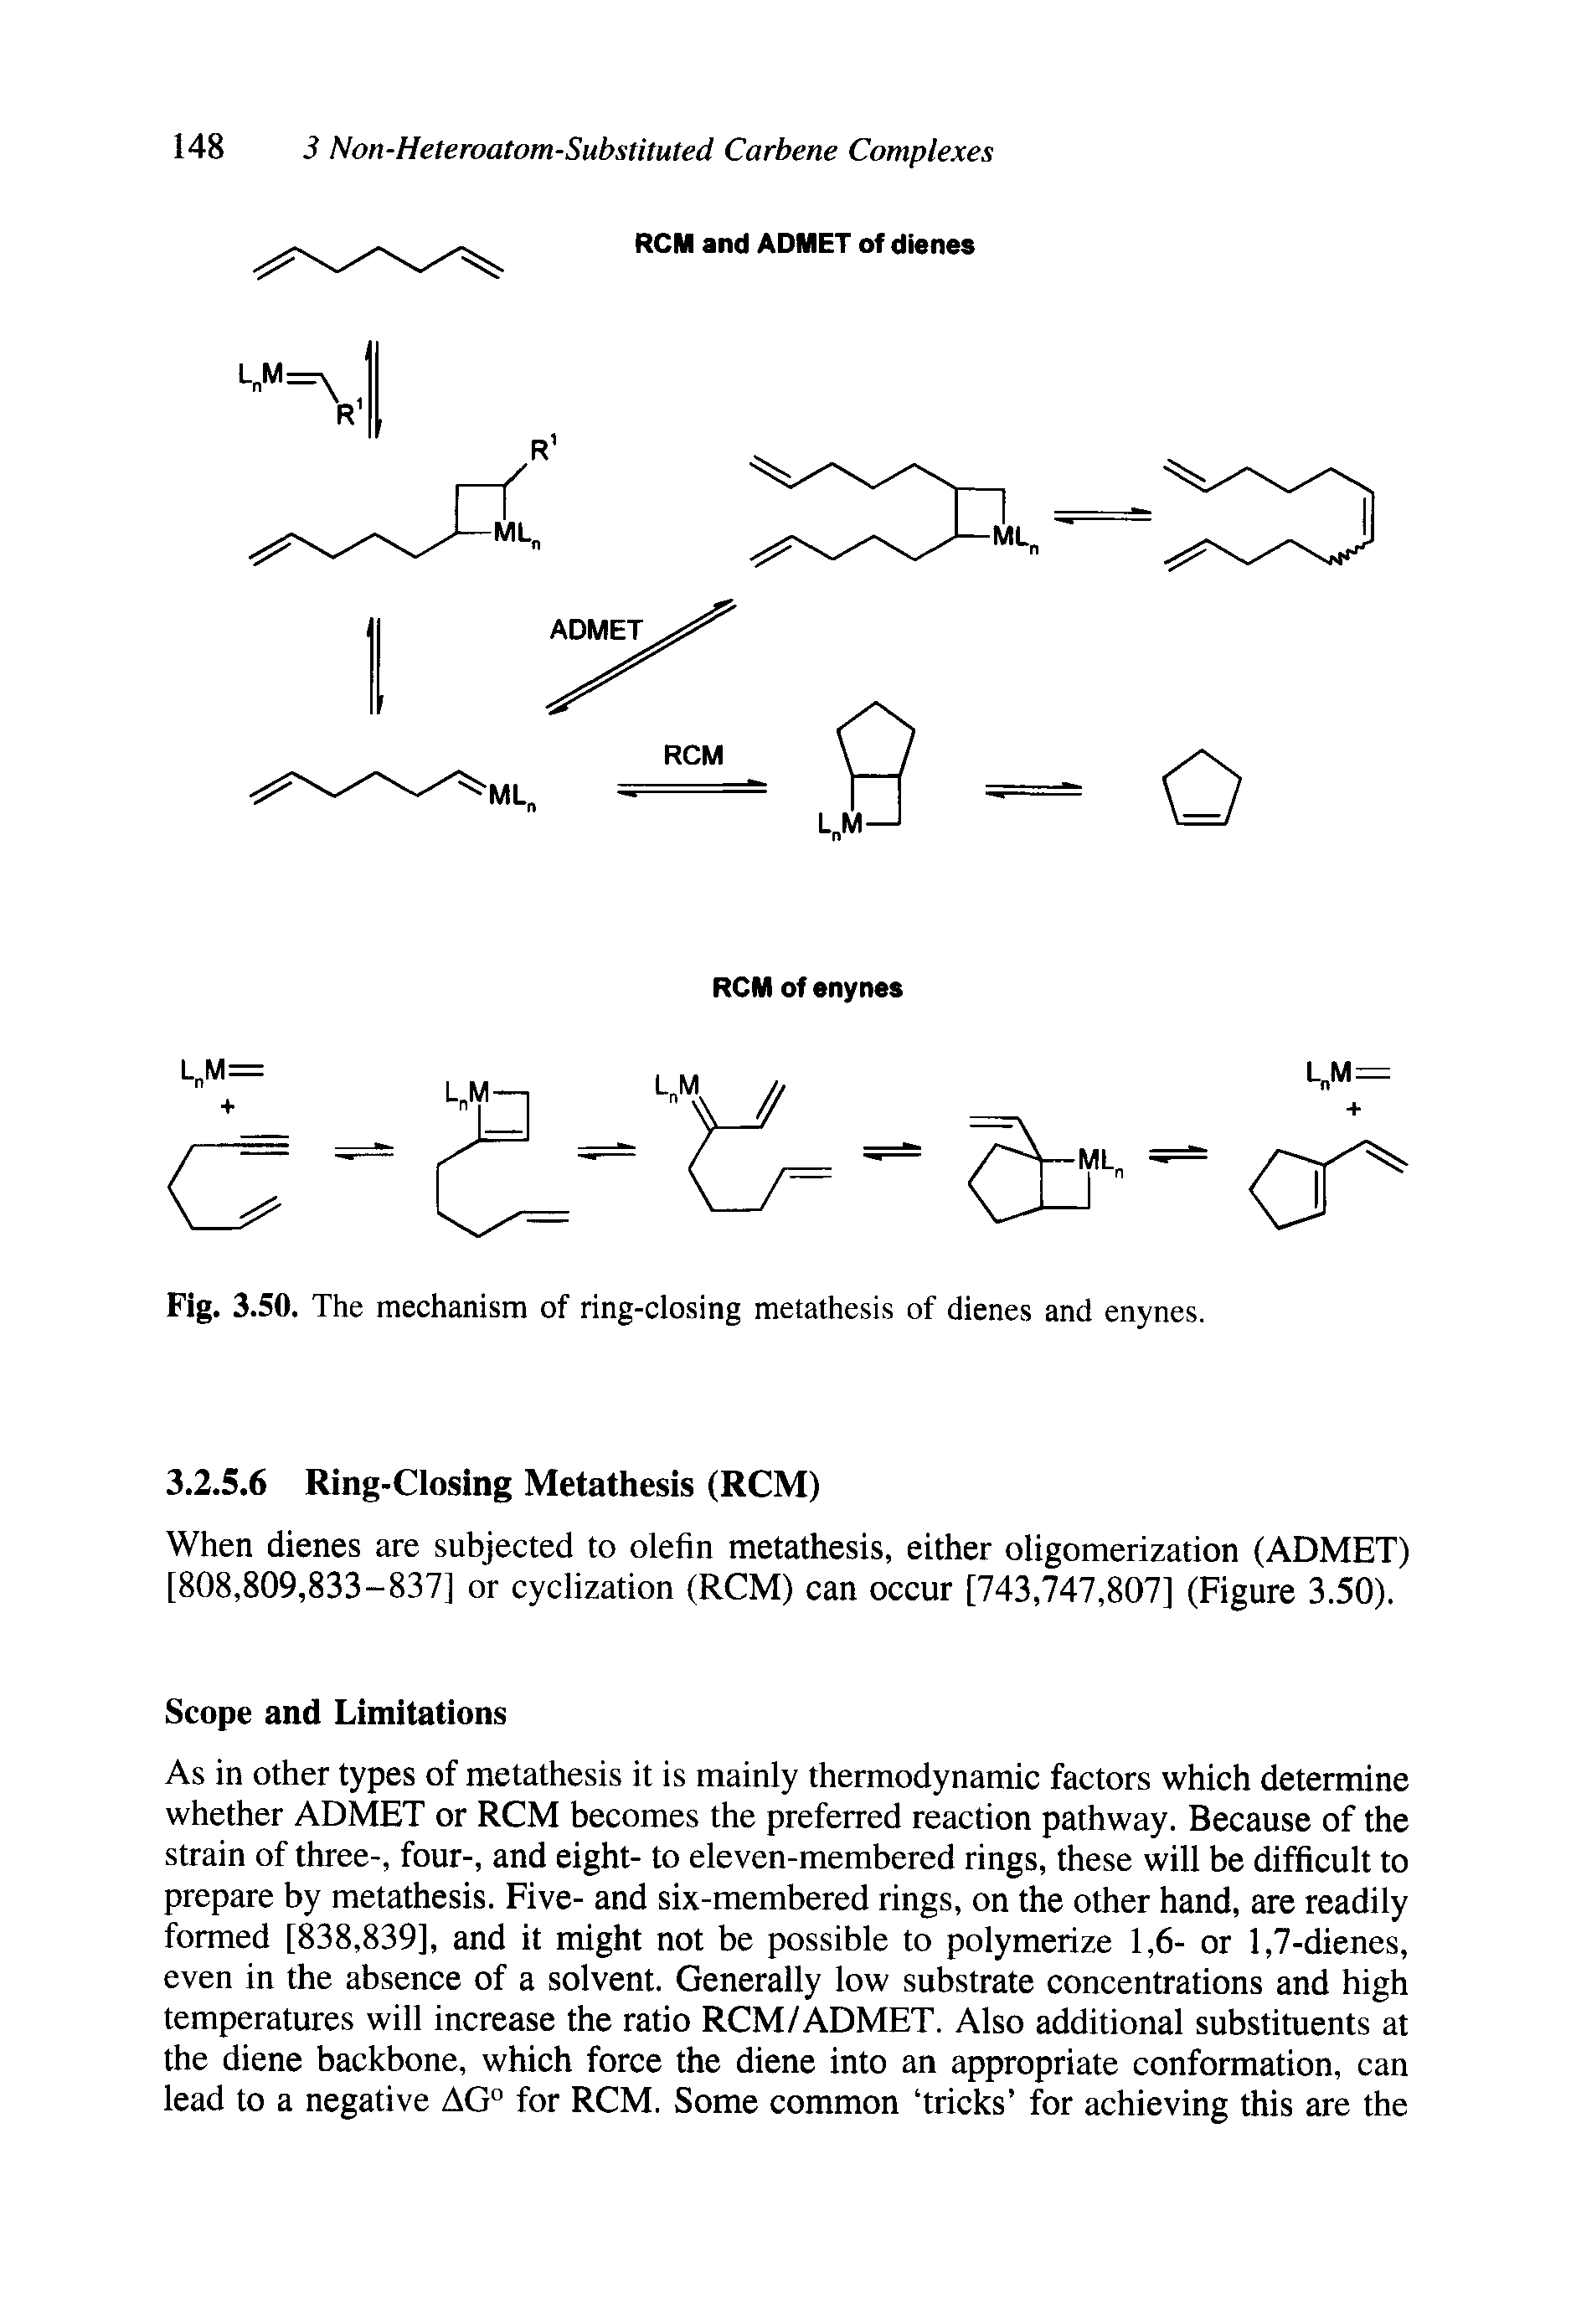 Fig. 3.50. The mechanism of ring-closing metathesis of dienes and enynes.